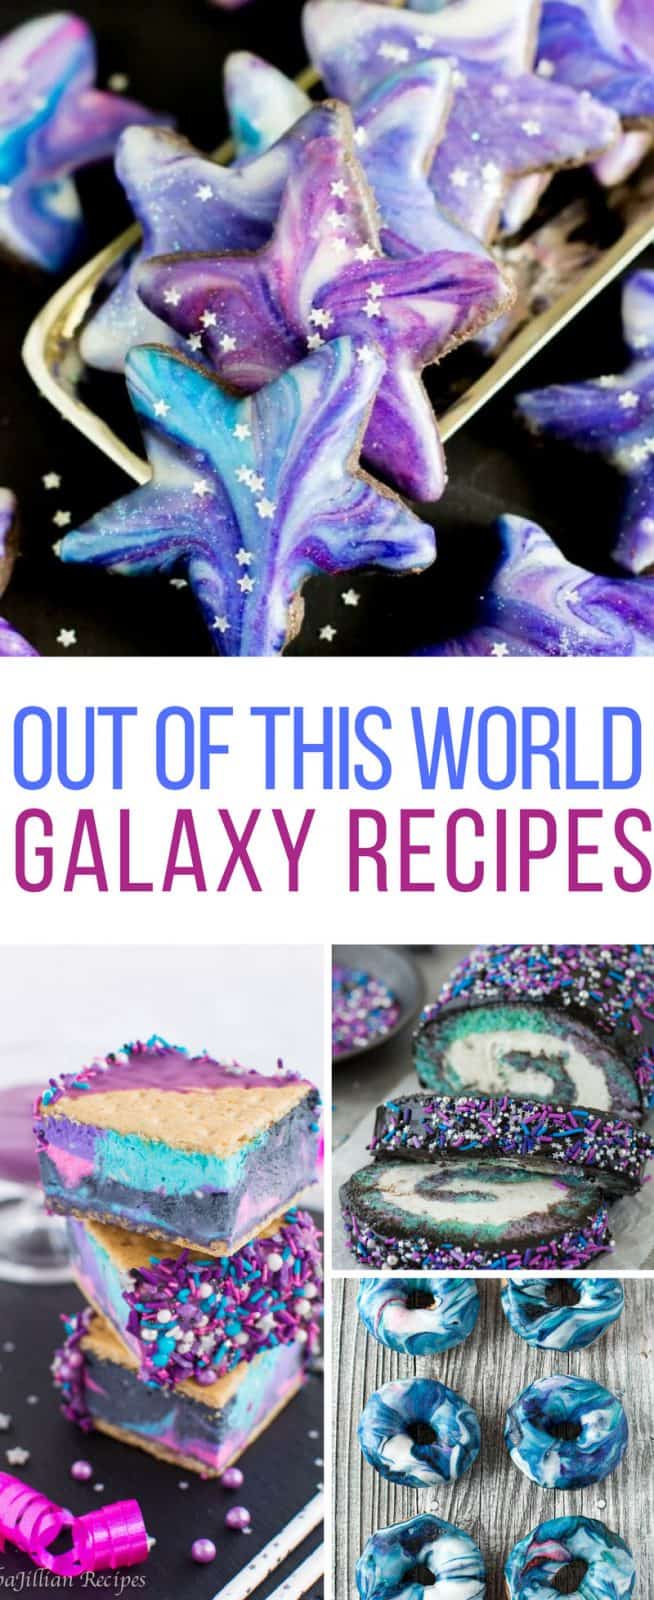 Loving these galaxy recipes - Thanks for sharing!